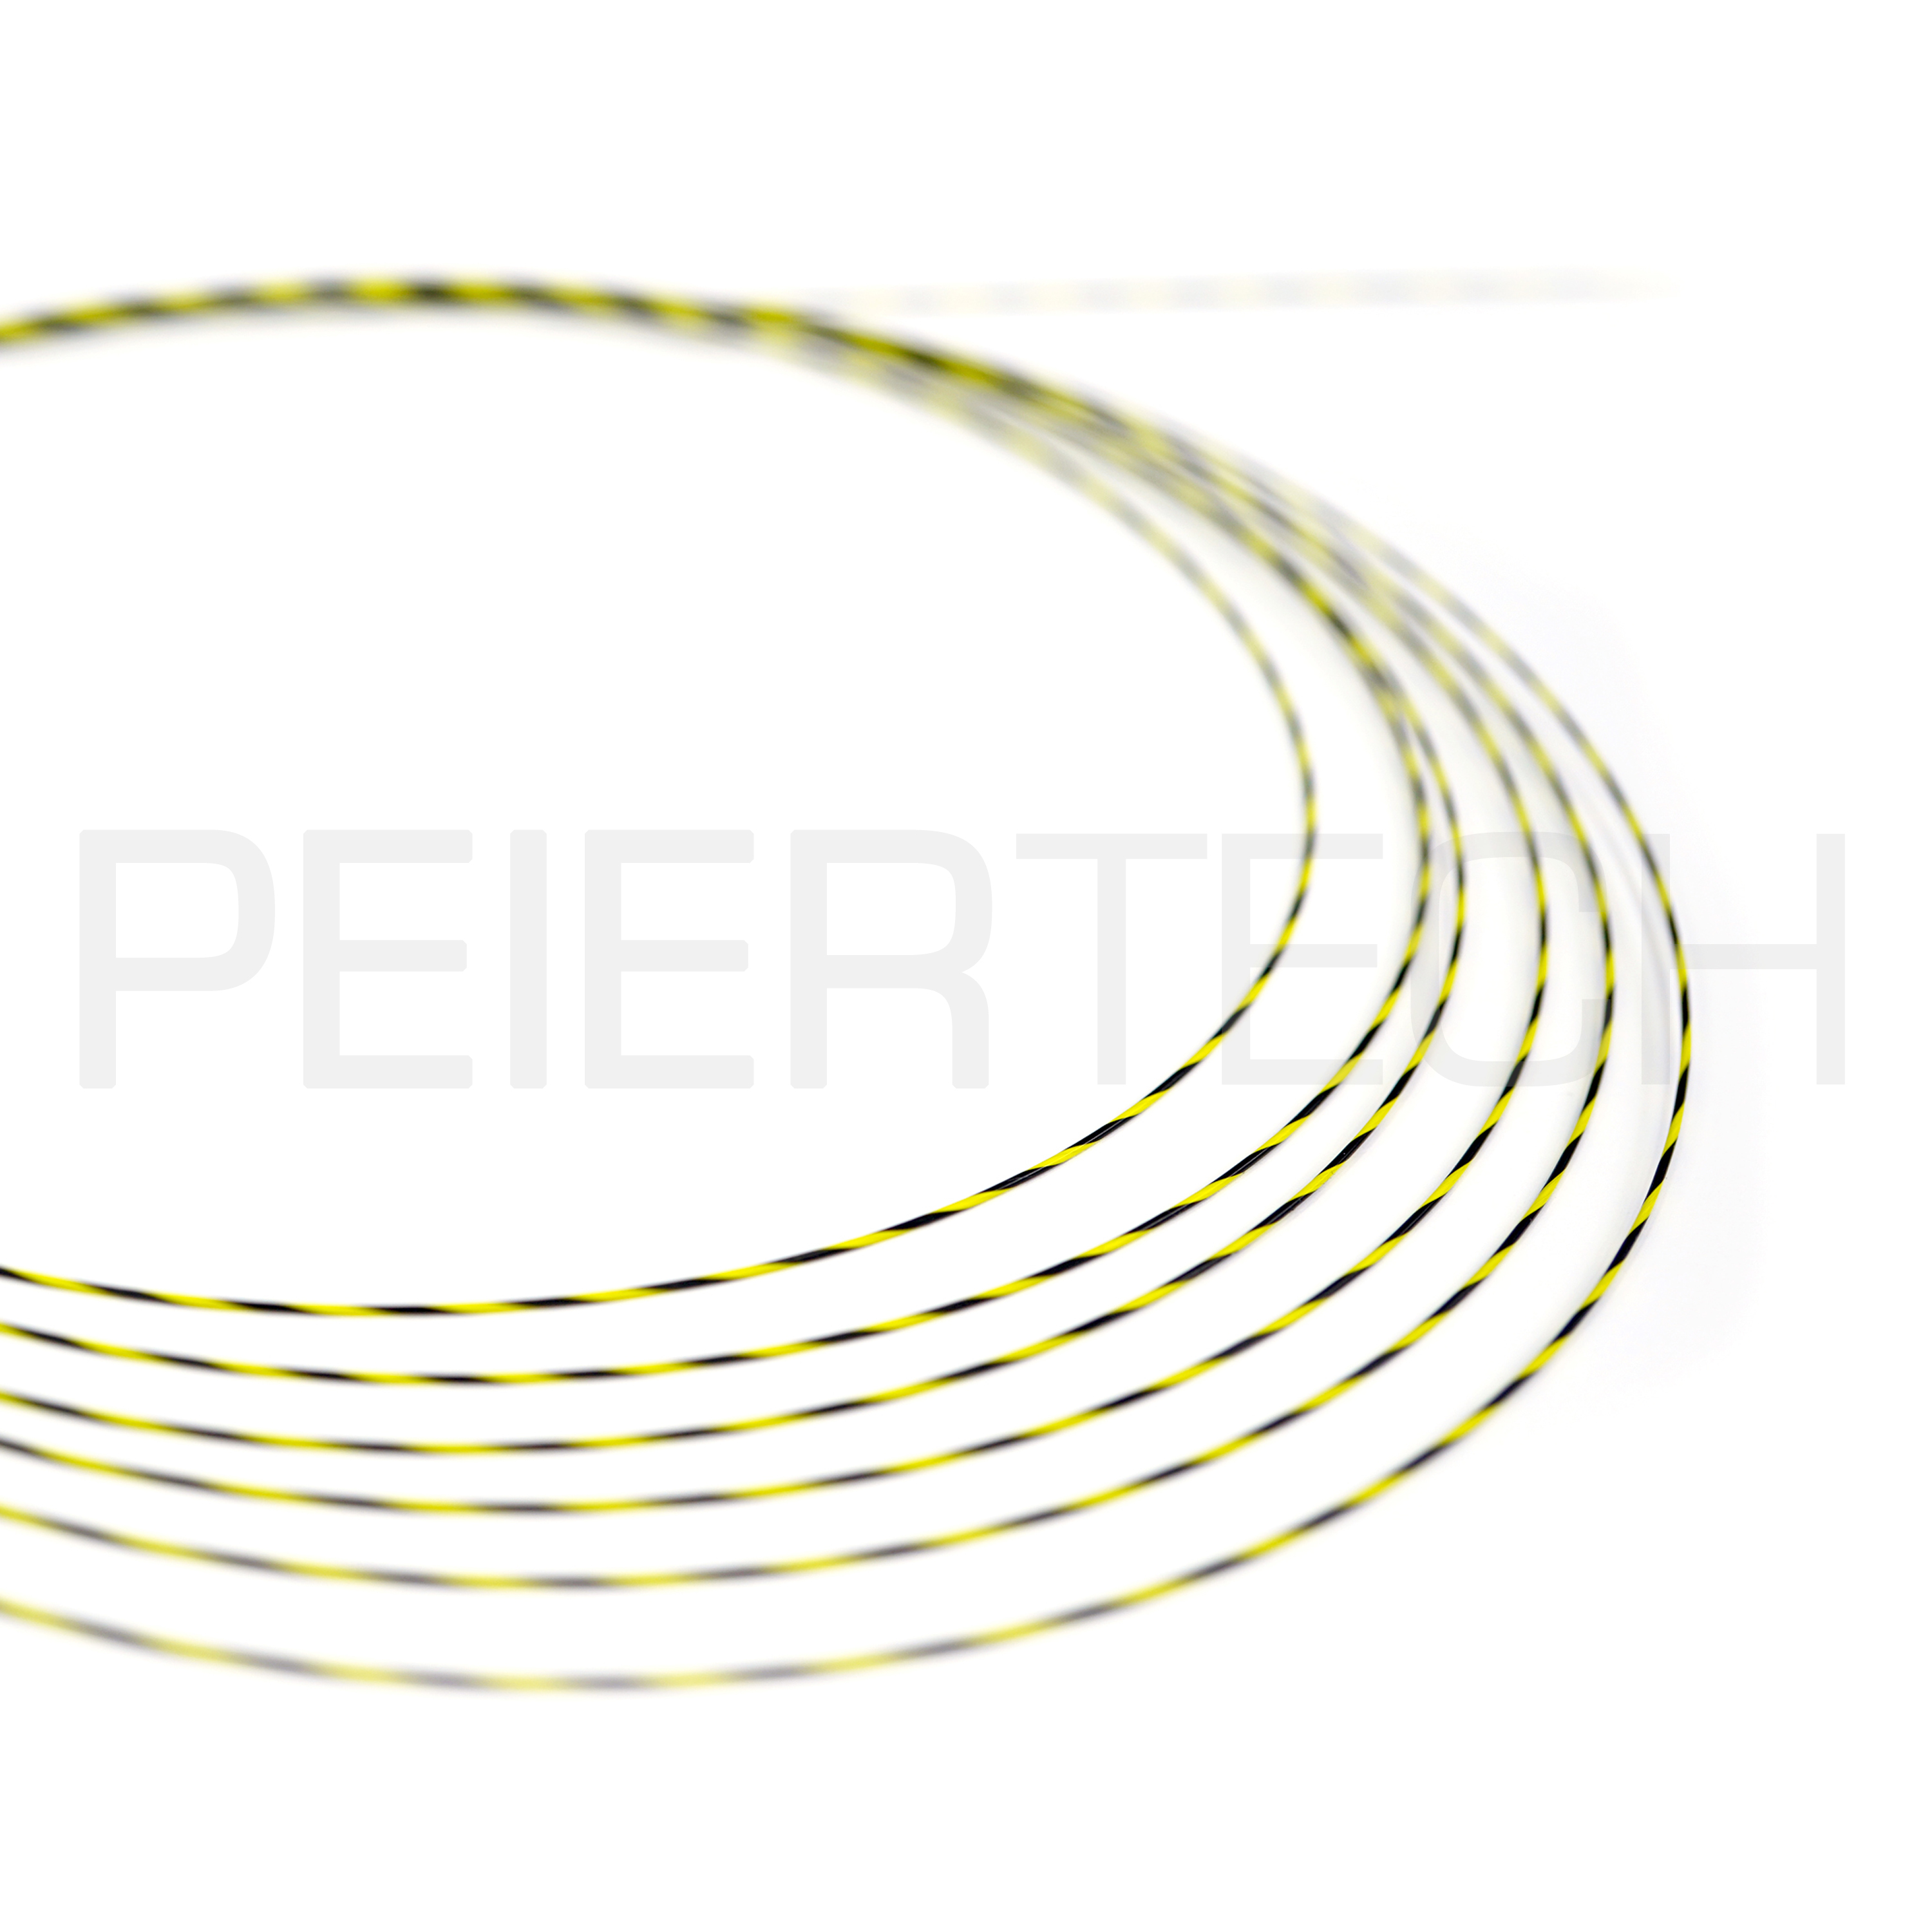 Nitinol Guide Wire Nitinol Wire We Do It All With Nitinol Peiertech provides High Quality Low Inclusion Nitinol Materials